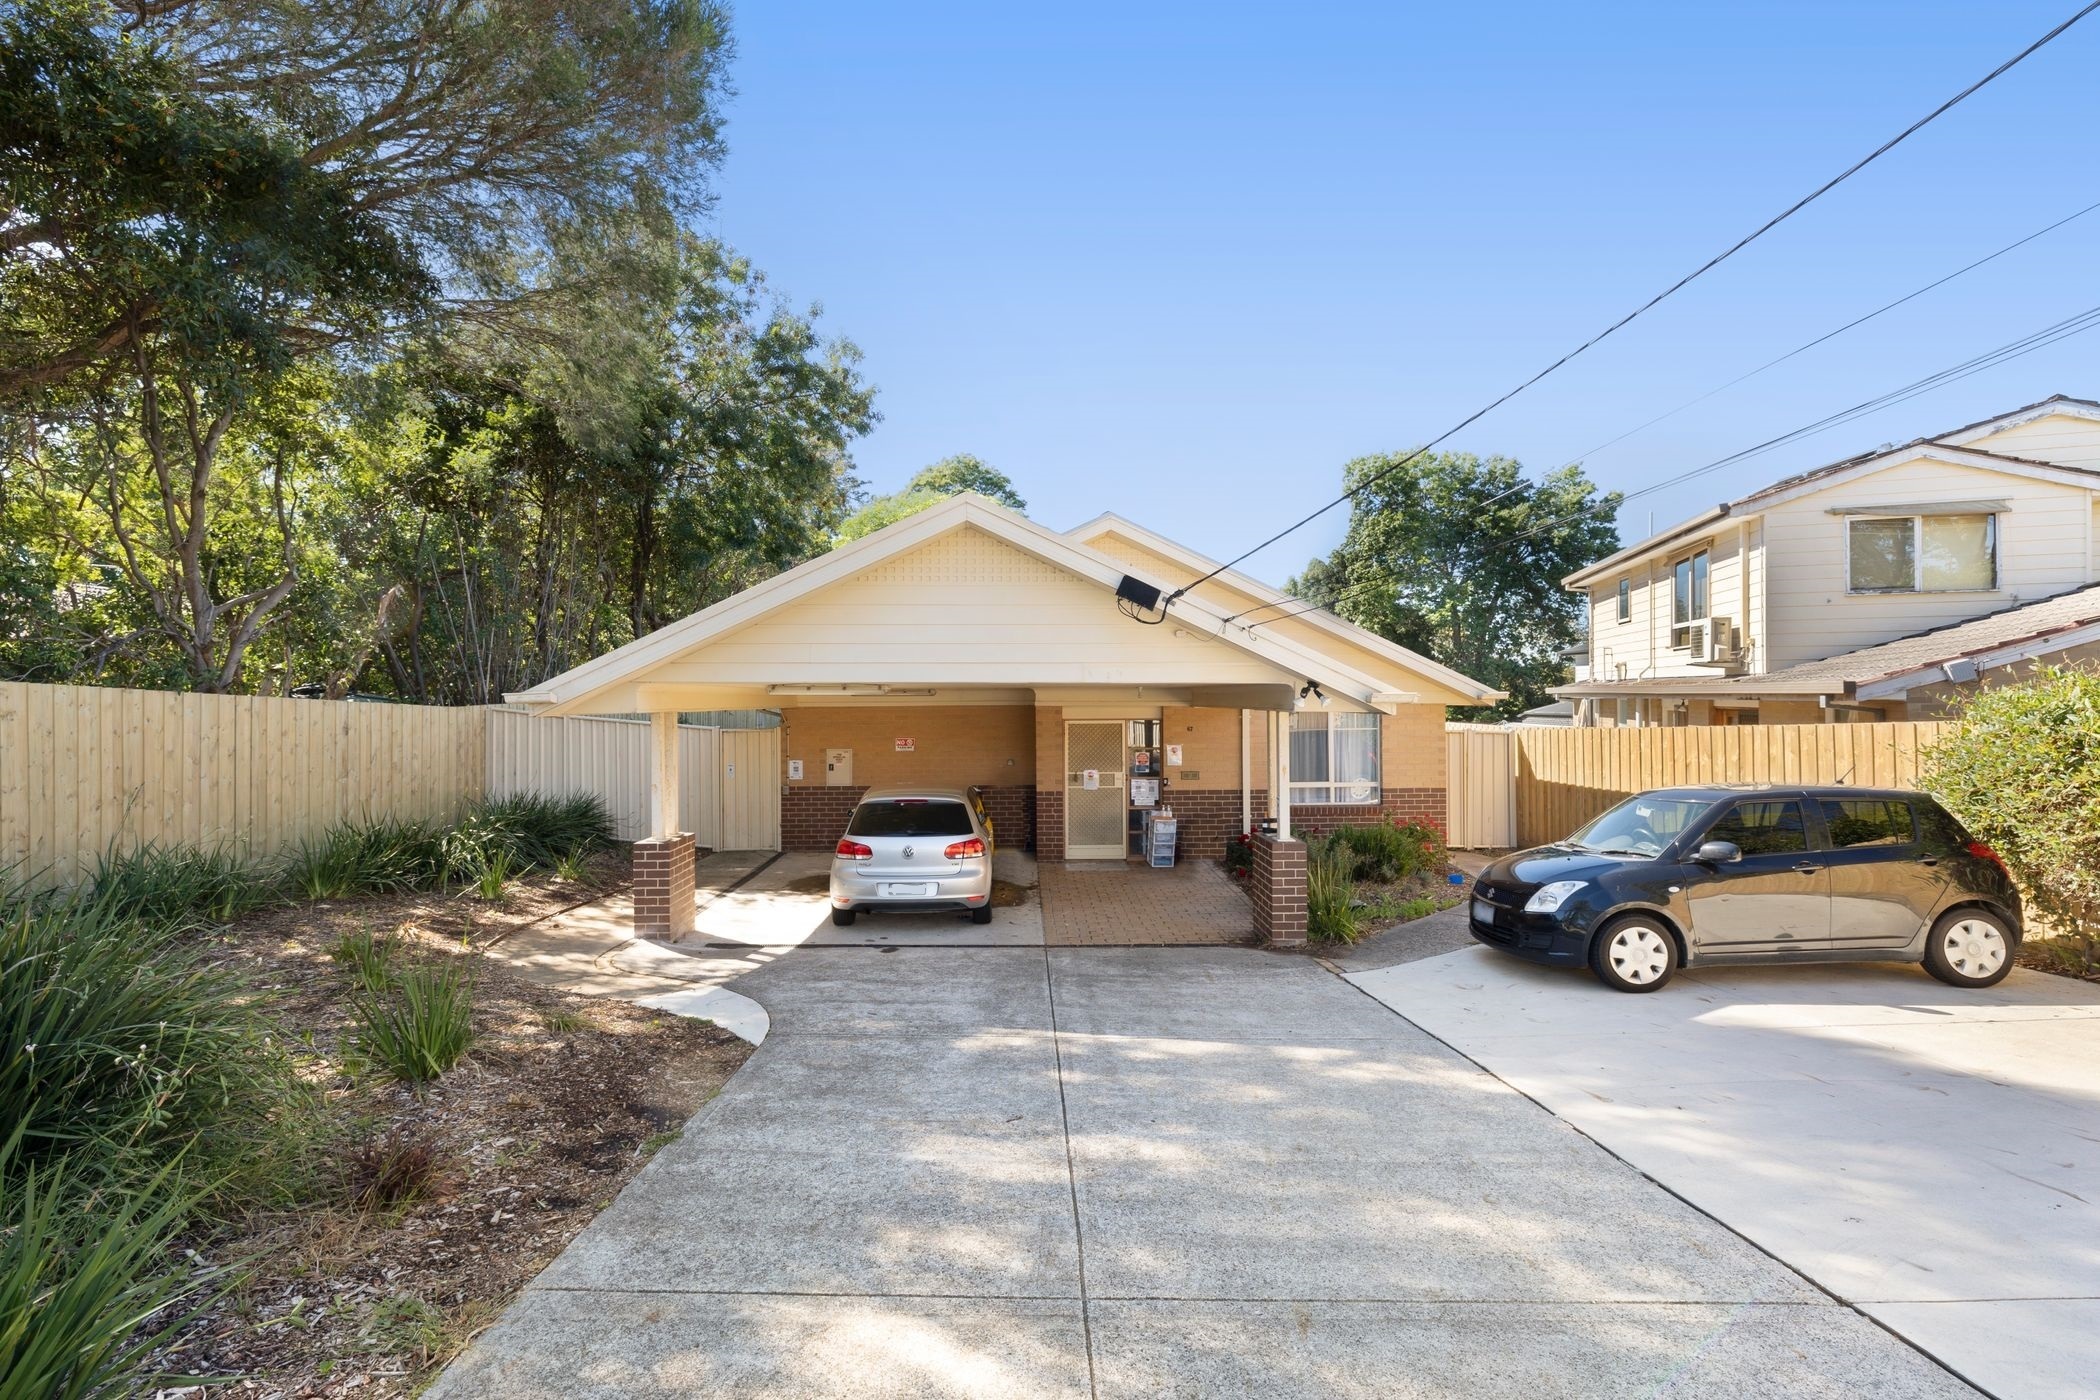 SDA property in Boronia with a carport and several parking spaces